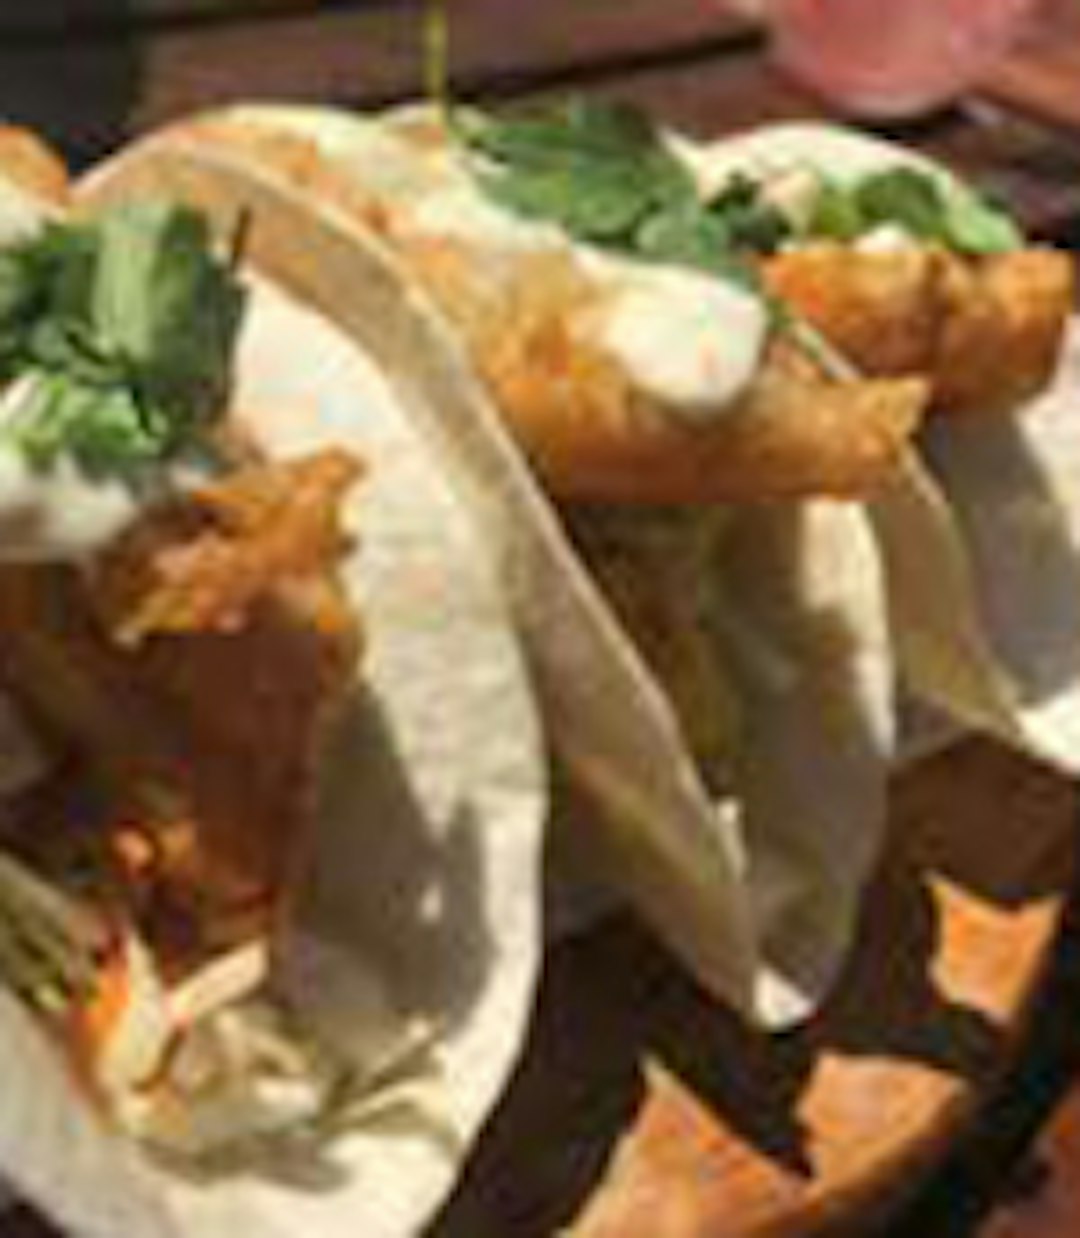 Fish tacos with a creamy sauce and fresh cilantro on top.